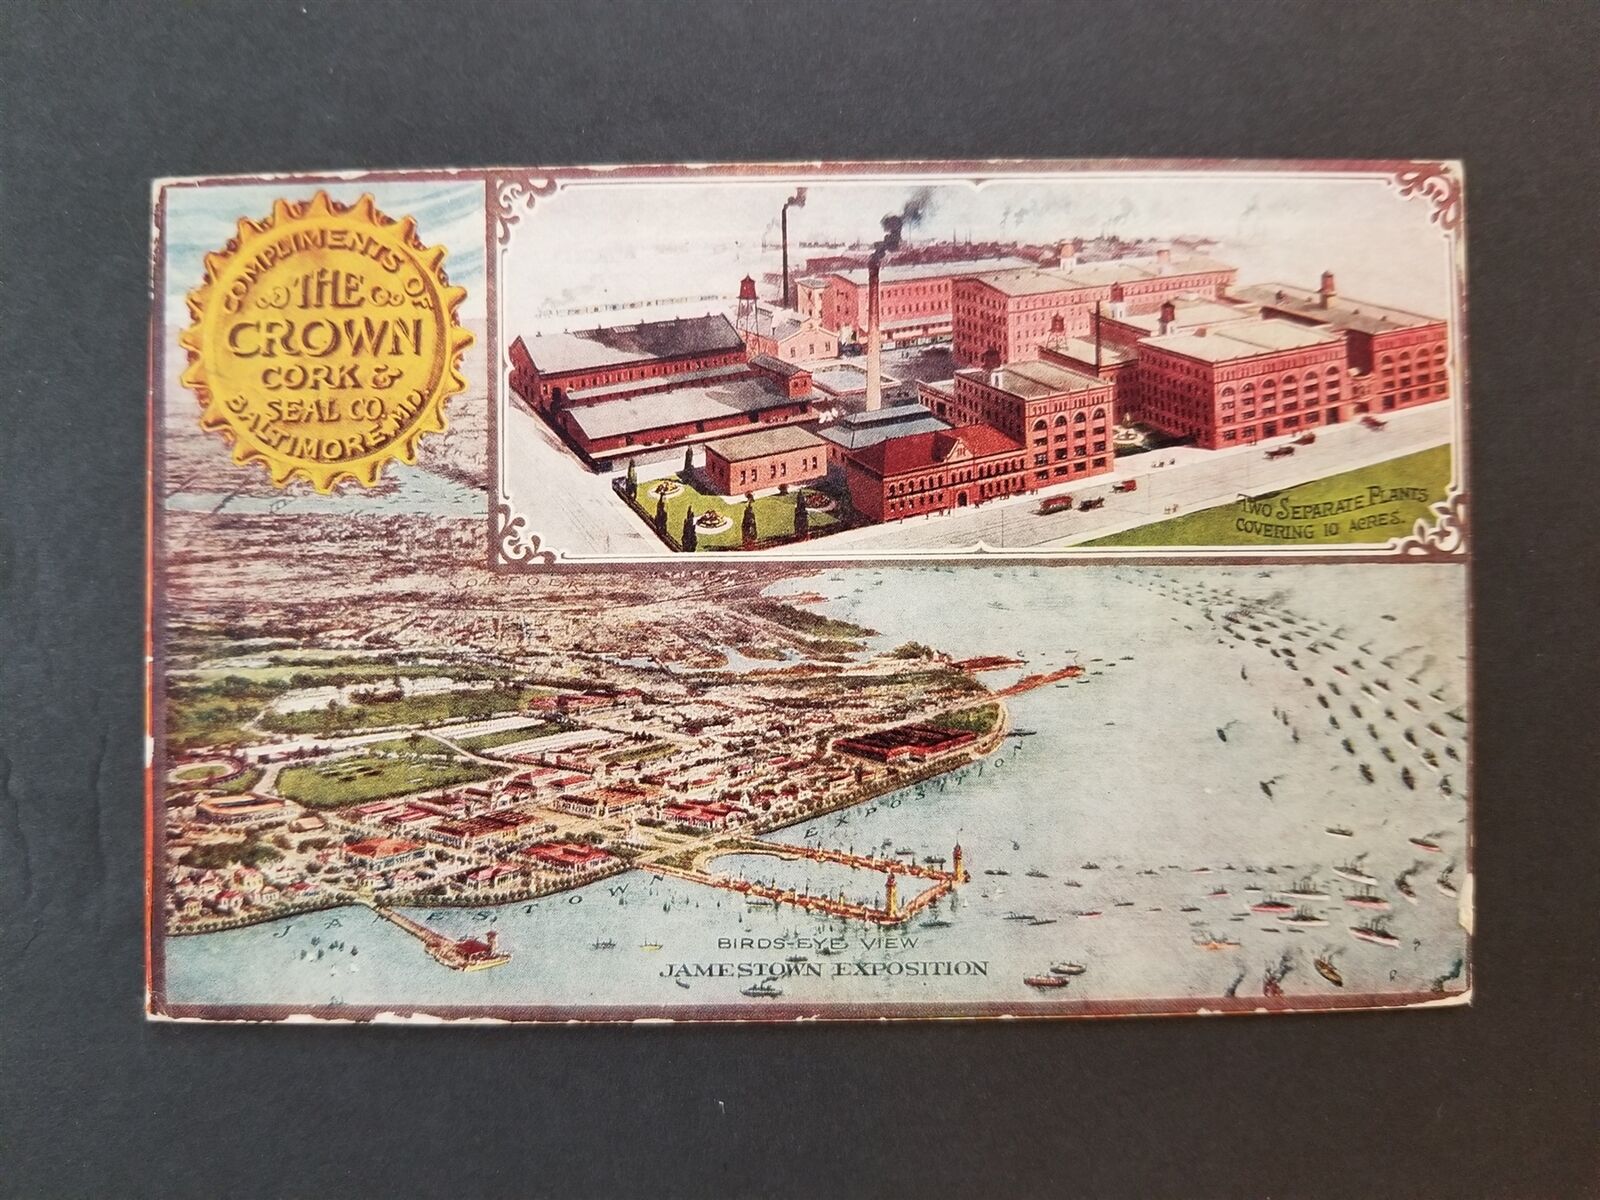 1907 antique CROWN CORK & SEAL Co baltimore md POSTCARD wv Mrs WILLCOX from SON